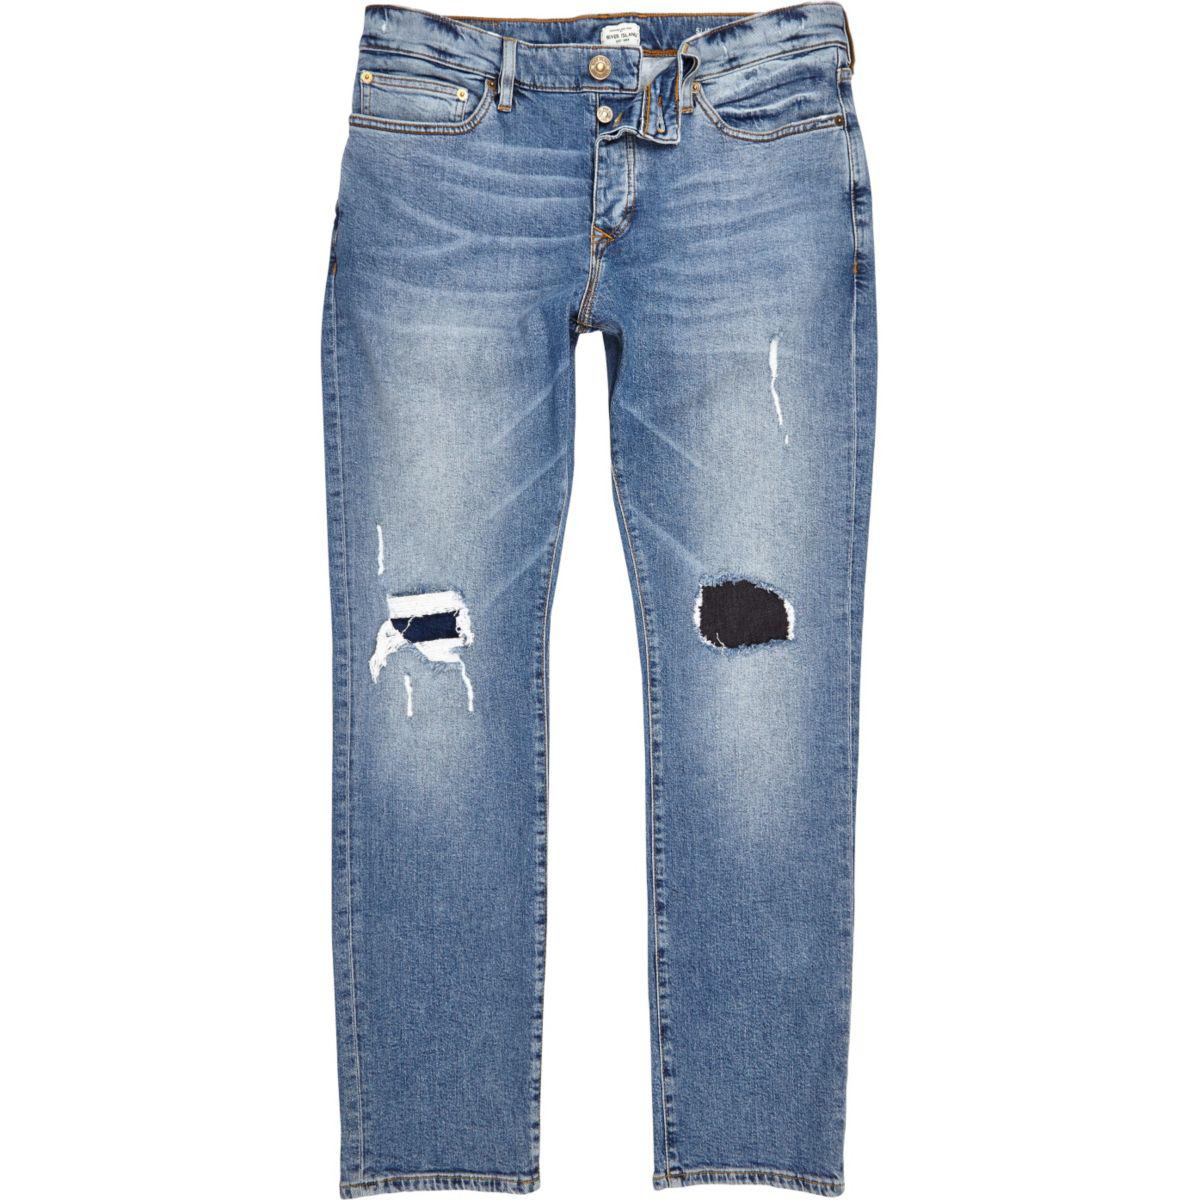 Lyst - River Island Mid Blue Wash Ripped Dylan Slim Jeans in Blue for Men